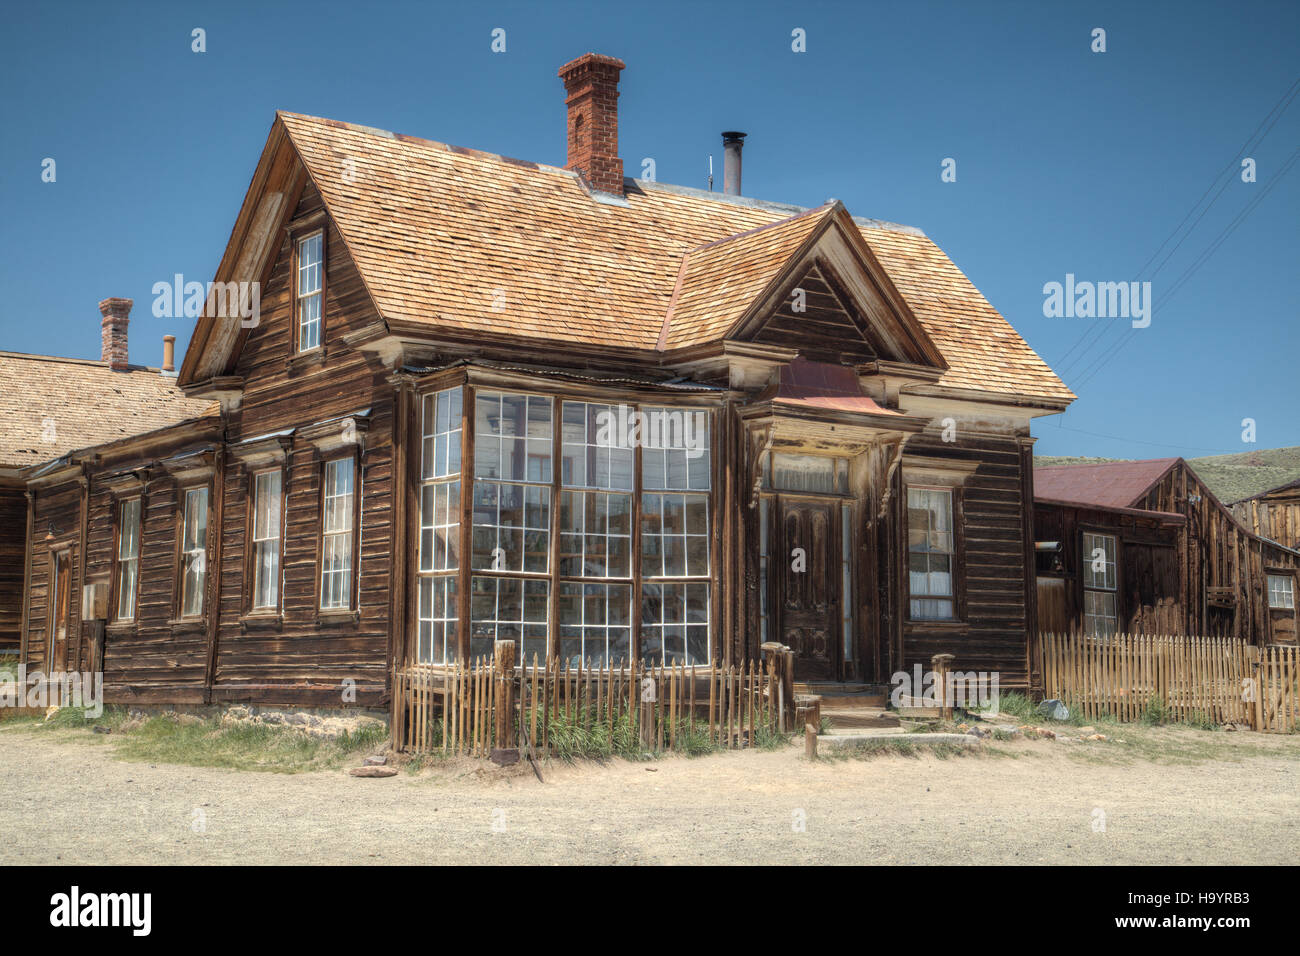 The Ciain House Store in Bodie, a ghost town visitor attraction in California.  Bodie is maintained in a state of arrested repair, maintained in a sta Stock Photo